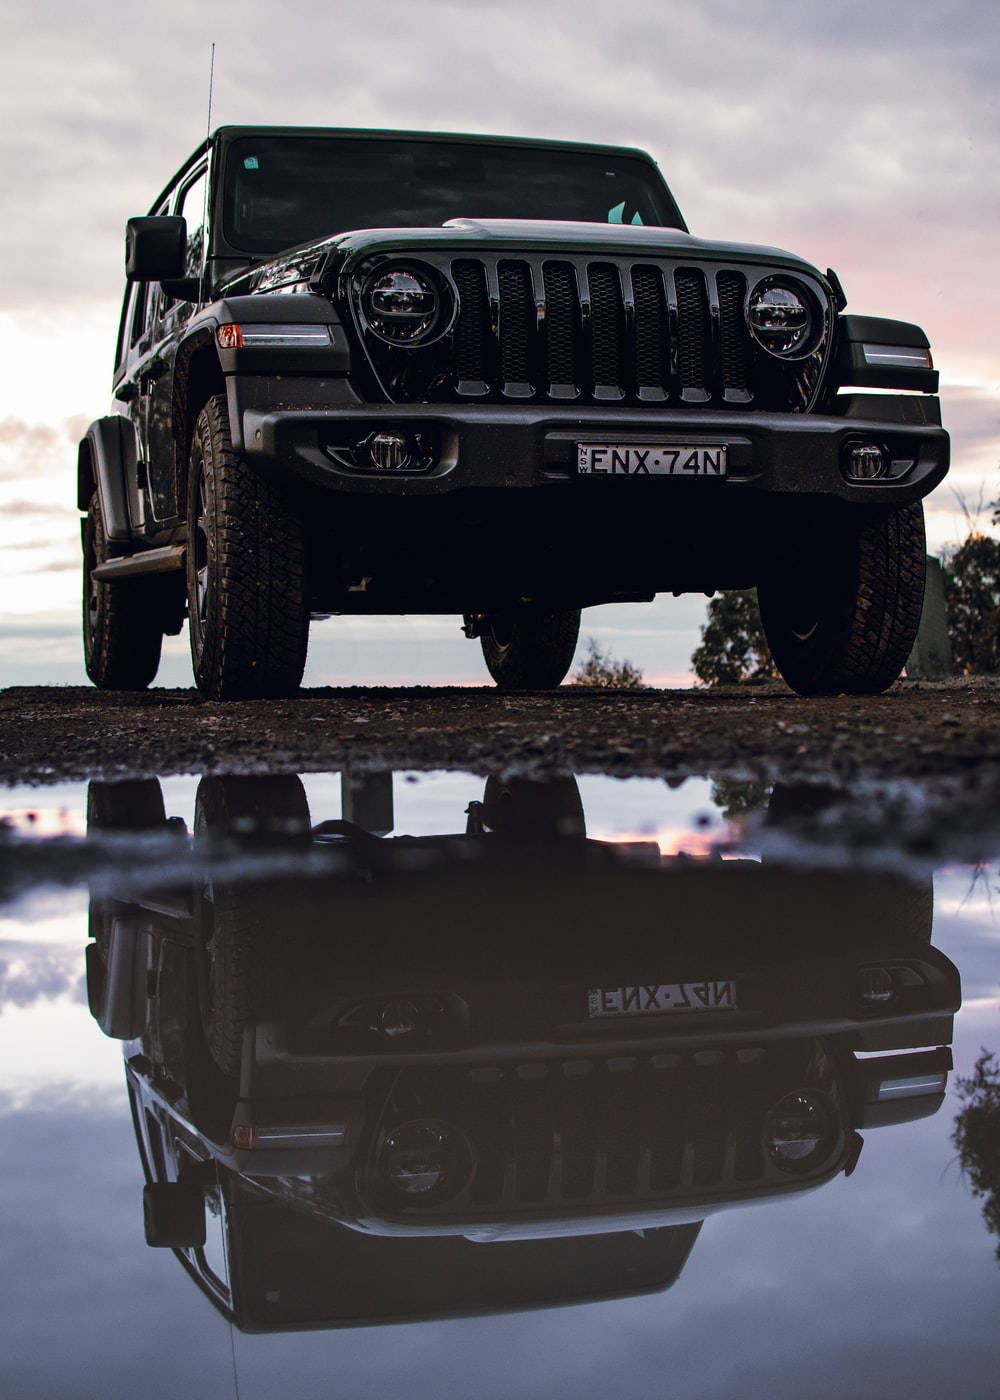 Black Jeep Wrangler Reflection On Water